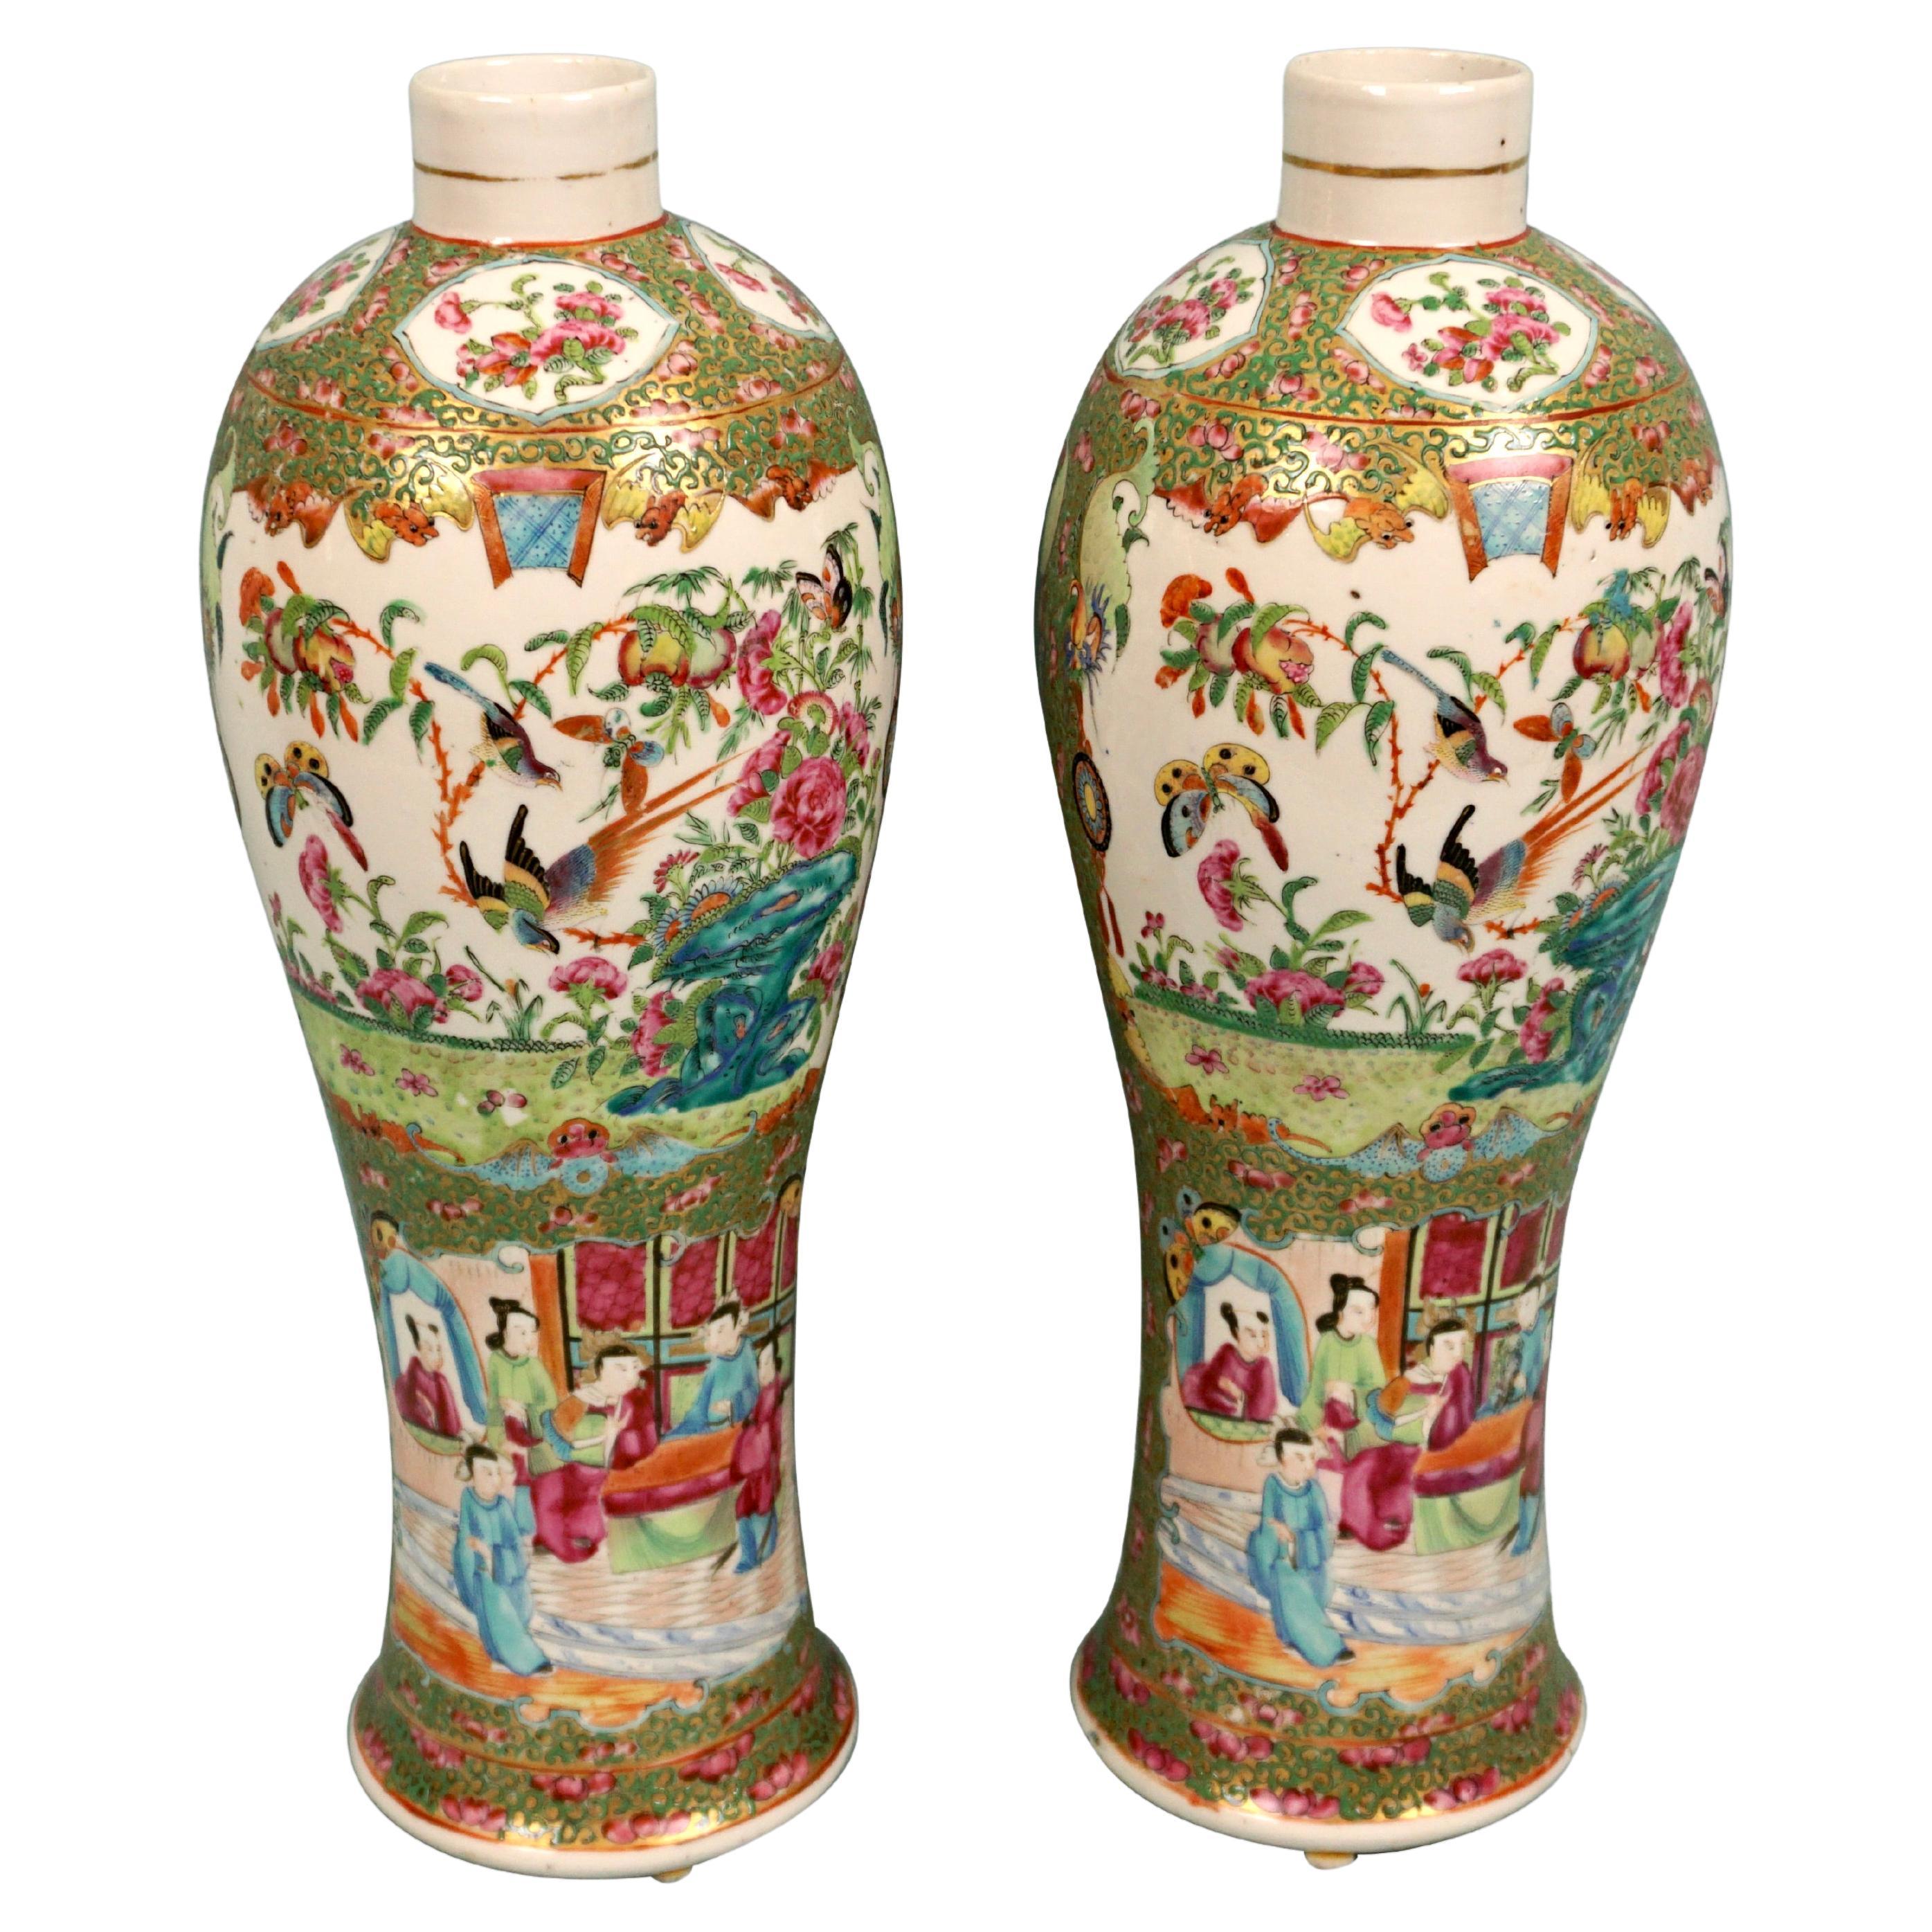 Pair of Chinese Export Famille Verte Vases Now Drilled For Lamps